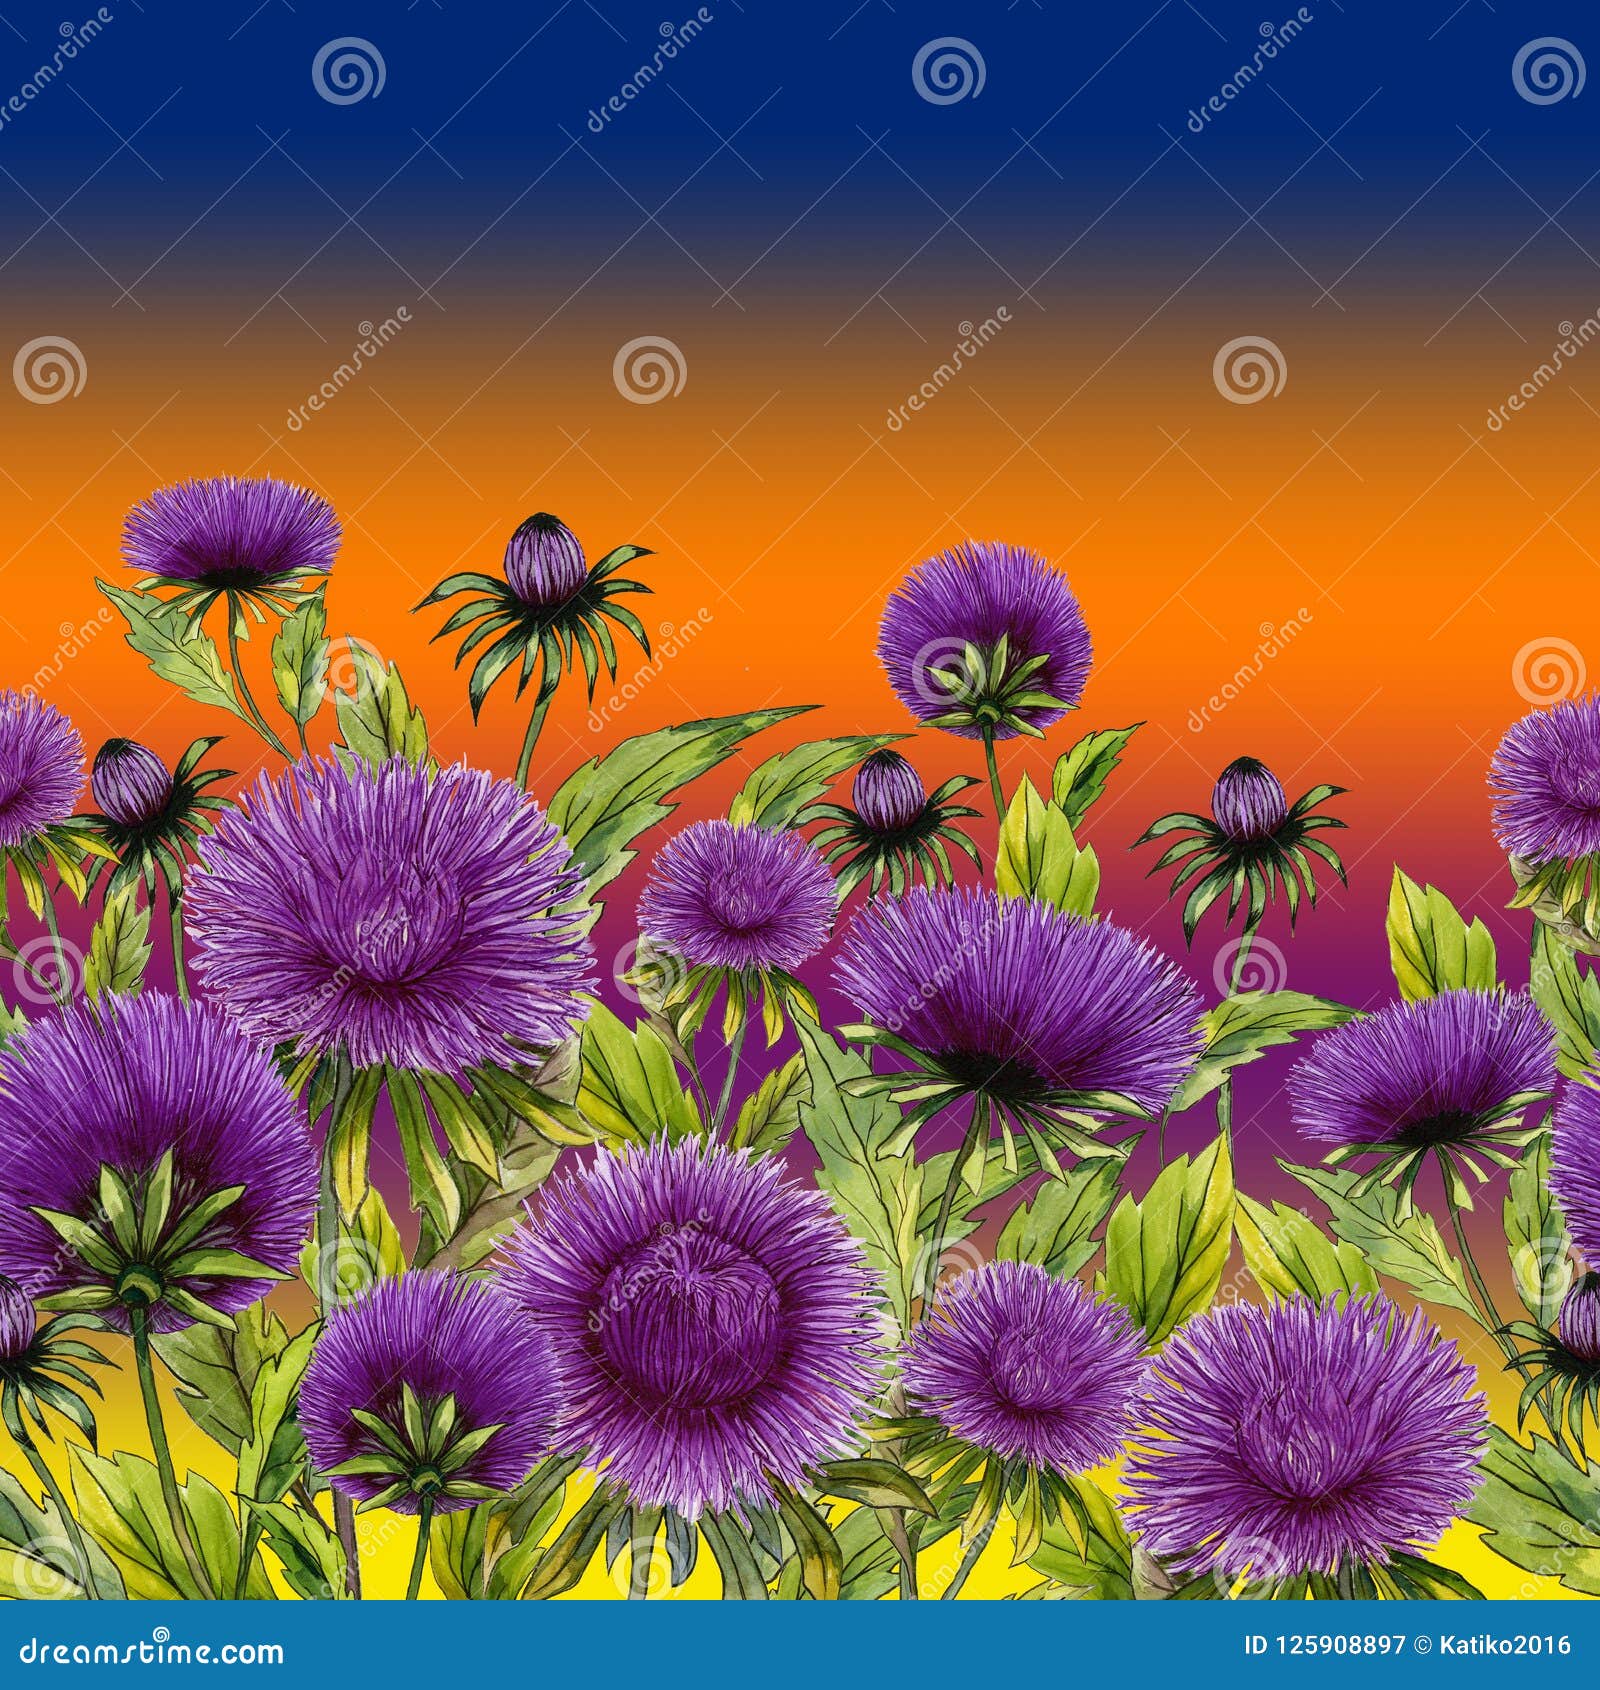 beautiful purple aster flowers with green leaves on bright gradient background. seamless floral pattern. watercolor painting